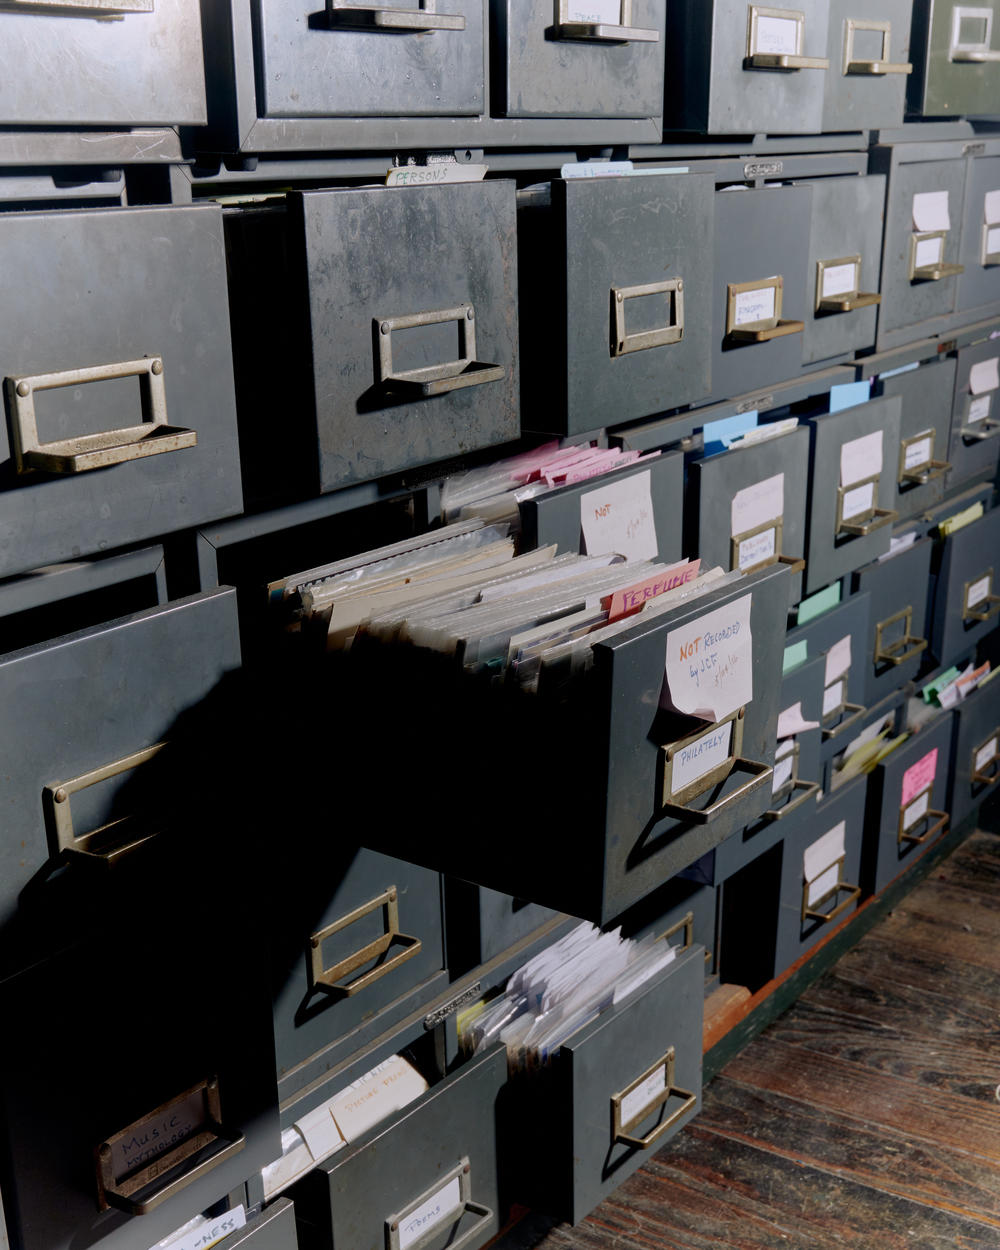 Filing cabinets organizing postcards by subject line the inside of Brown's home.